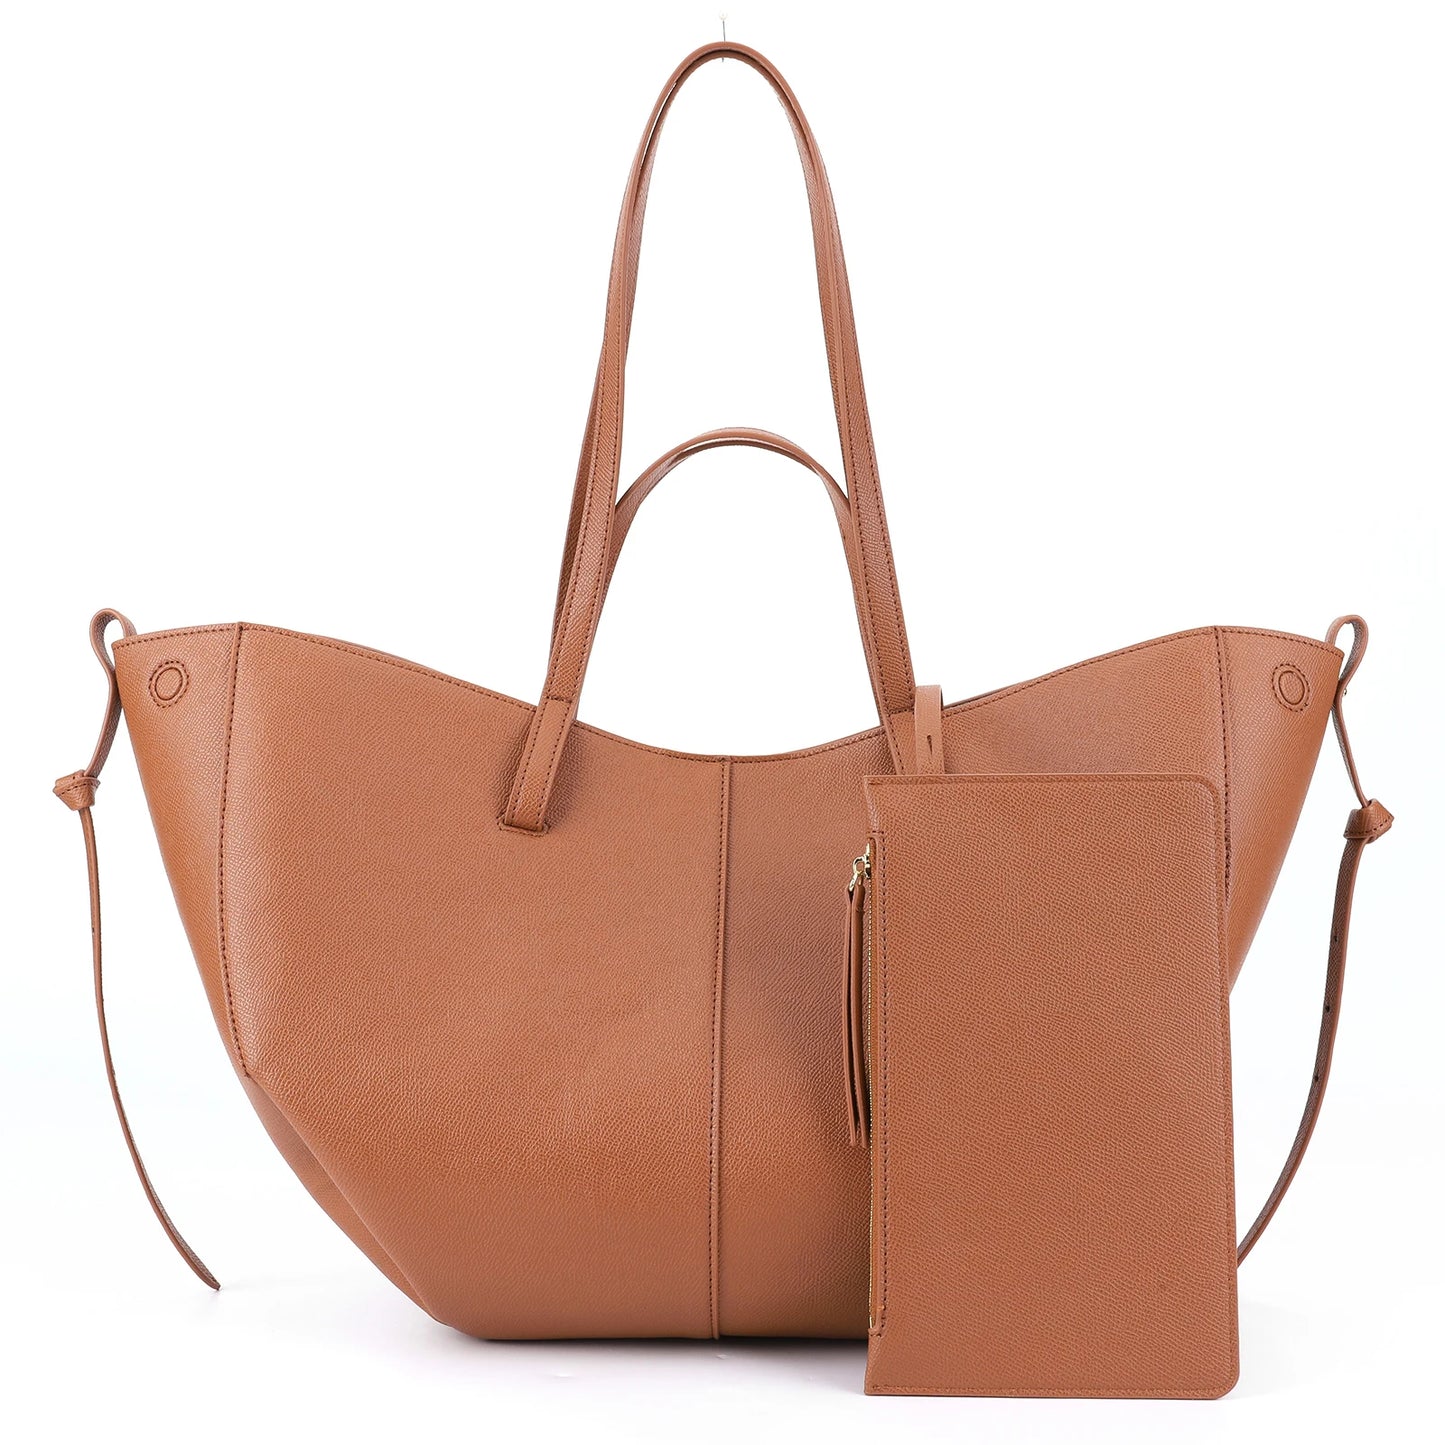 Timeless Tote Bag